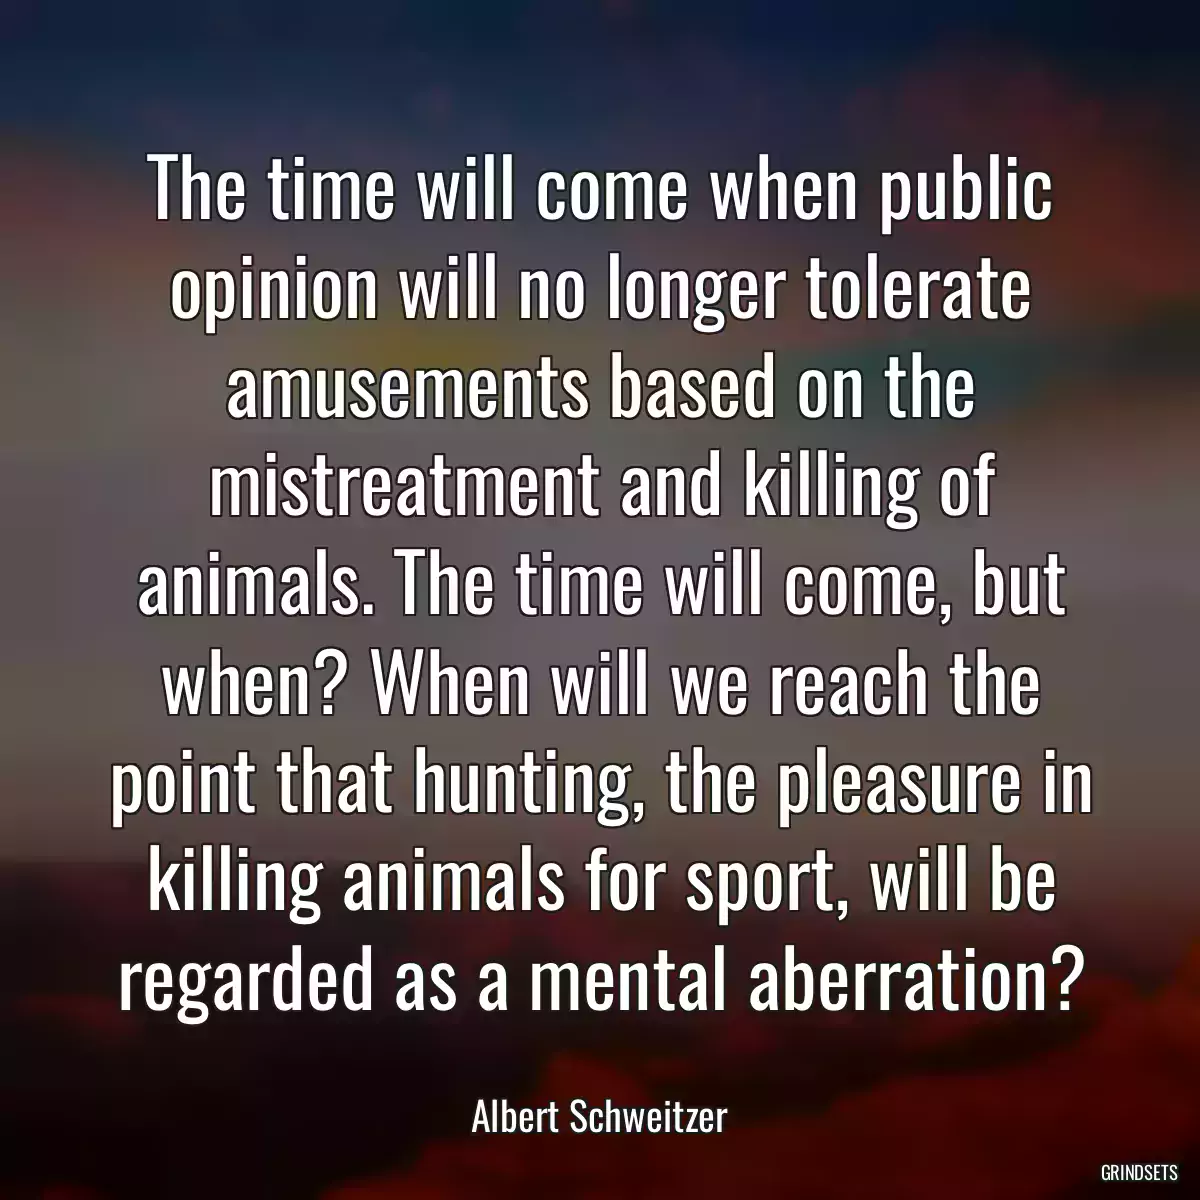 The time will come when public opinion will no longer tolerate amusements based on the mistreatment and killing of animals. The time will come, but when? When will we reach the point that hunting, the pleasure in killing animals for sport, will be regarded as a mental aberration?